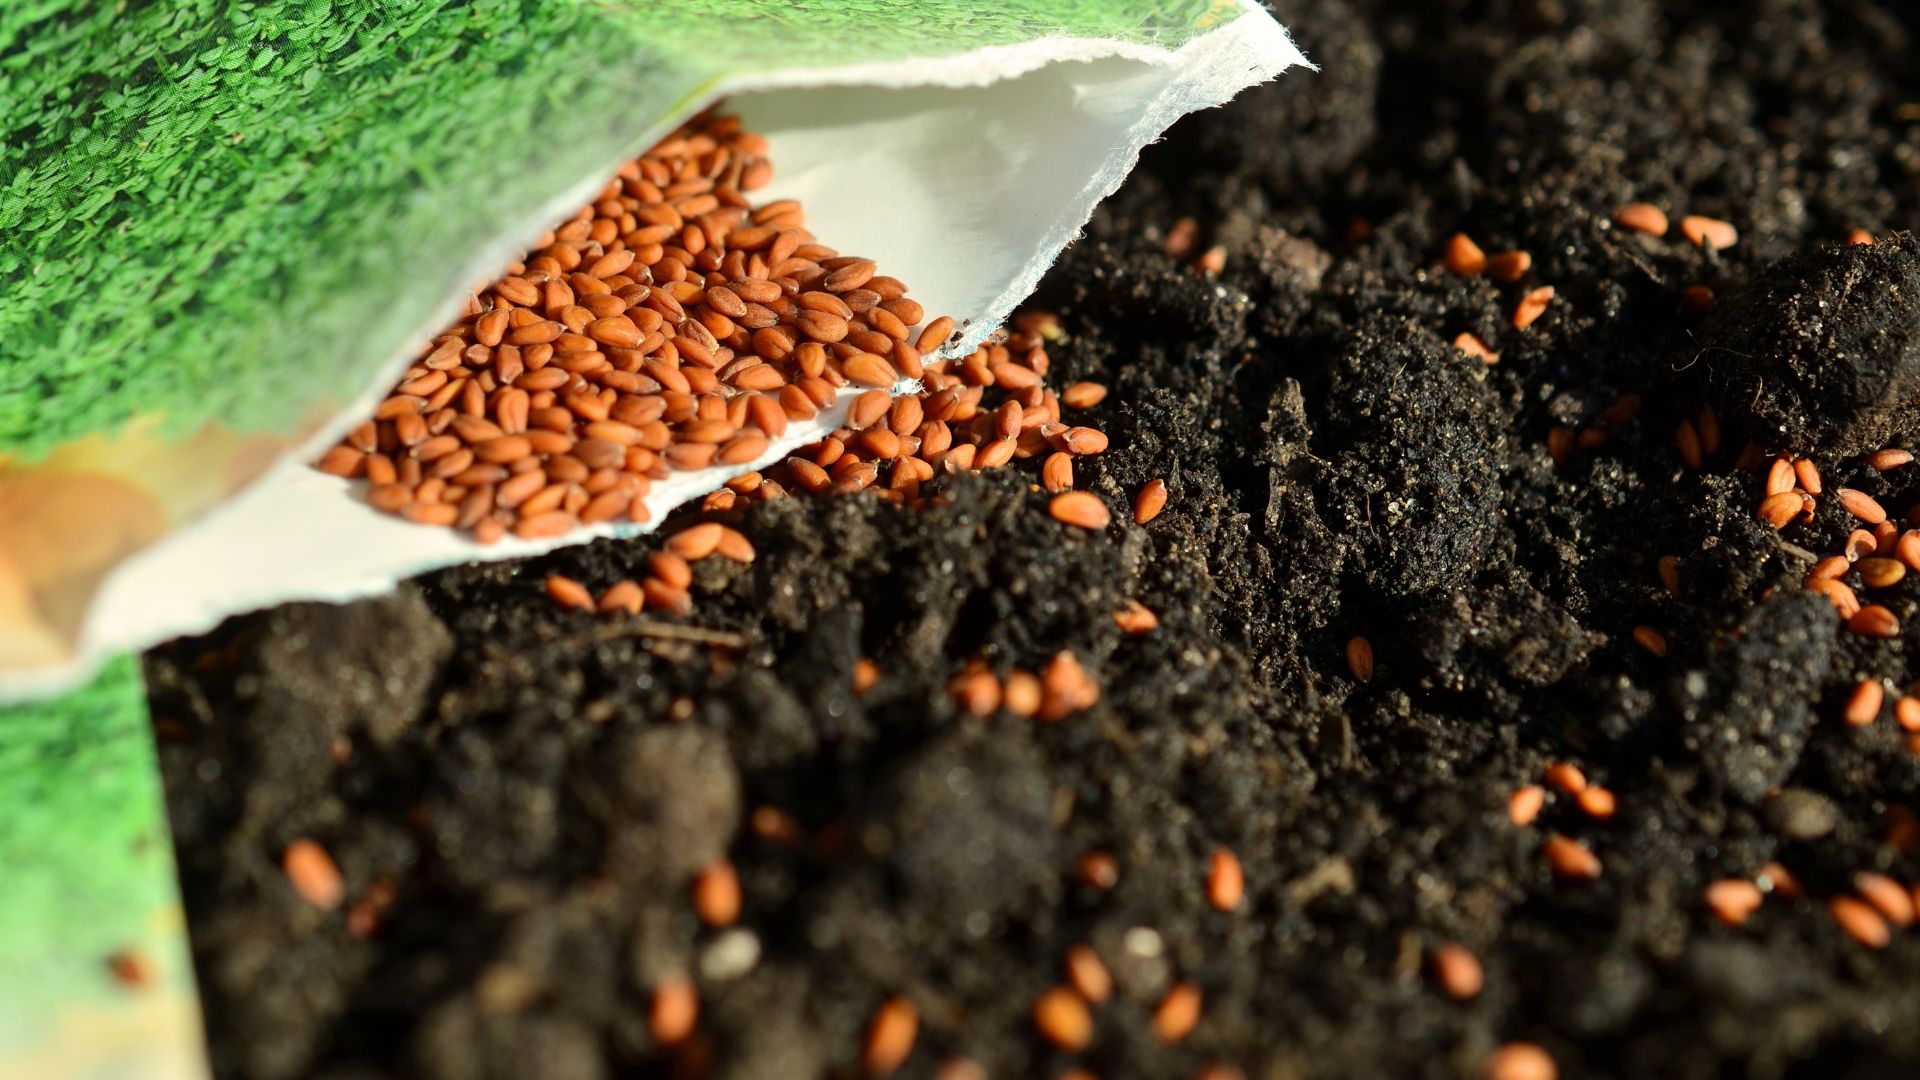 Seed packet spilling seeds on the dirt